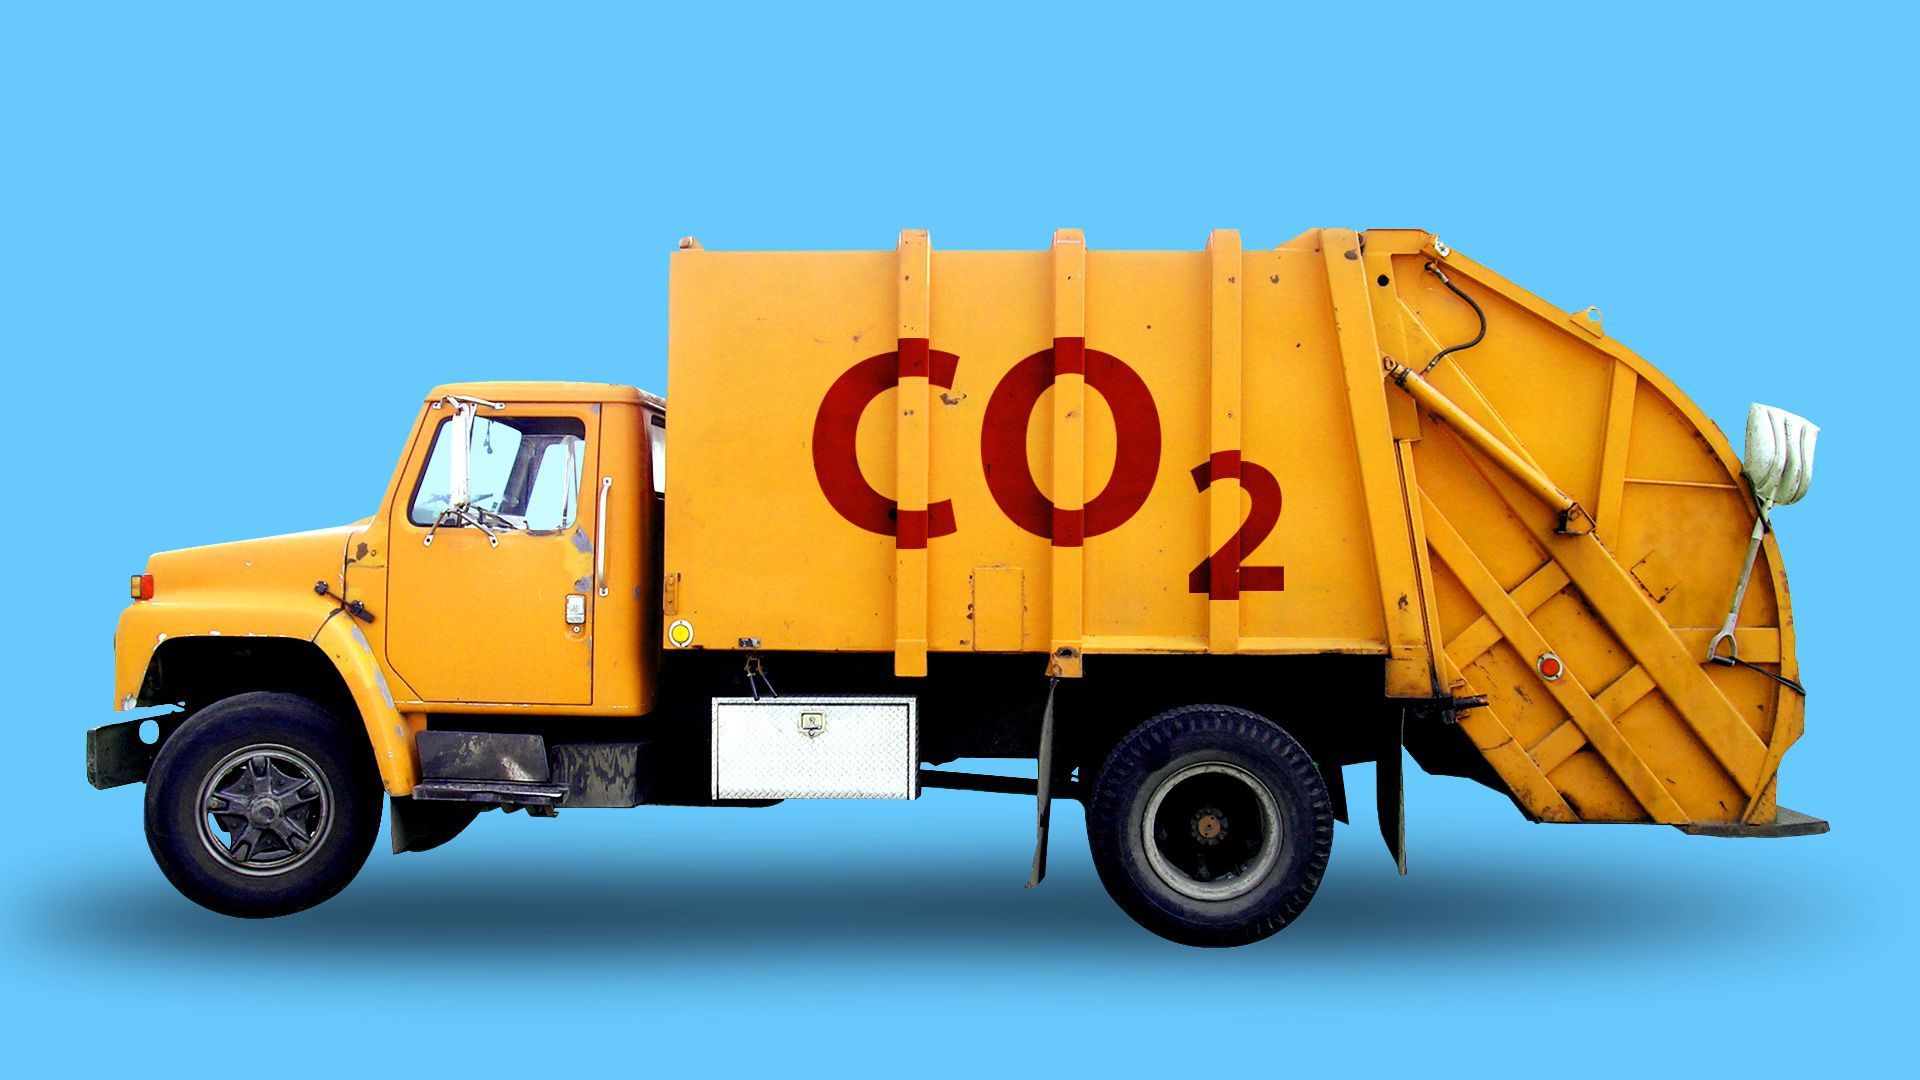 A dump truck with Co2 on it. 